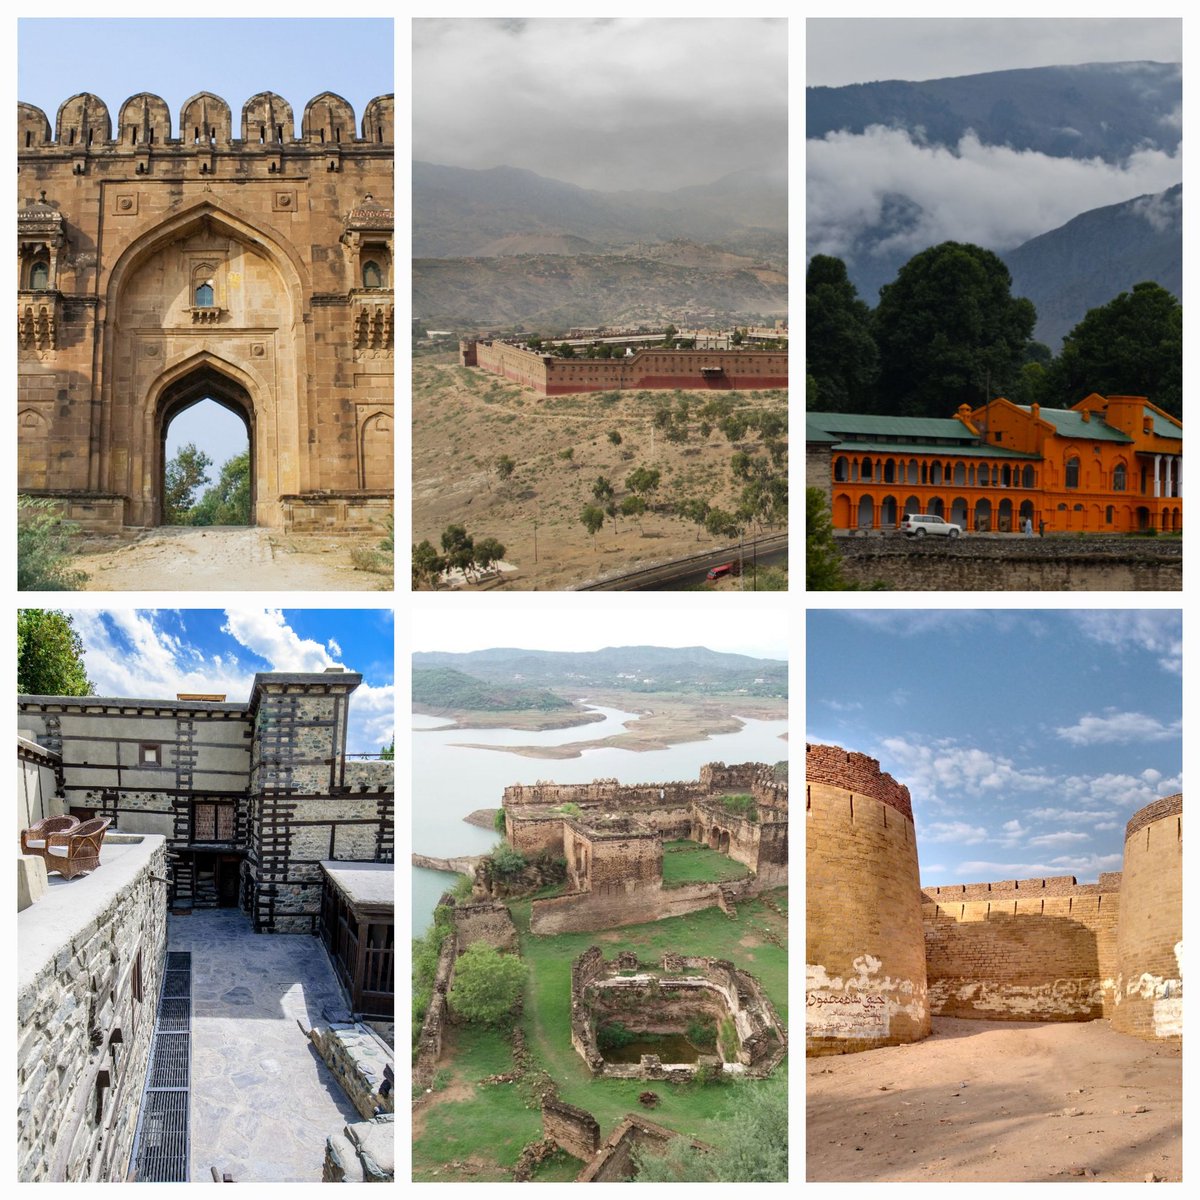 𝐇𝐢𝐬𝐭𝐨𝐫𝐢𝐜𝐚𝐥 𝐅𝐨𝐫𝐭𝐬 𝐢𝐧 𝐏𝐚𝐤𝐢𝐬𝐭𝐚𝐧 Pakistan not only has some of the most scenic travel destinations, but it also has some amazing historical monuments, including Forts, some of which are thousands of years old. Here is a thread about some of these Forts.